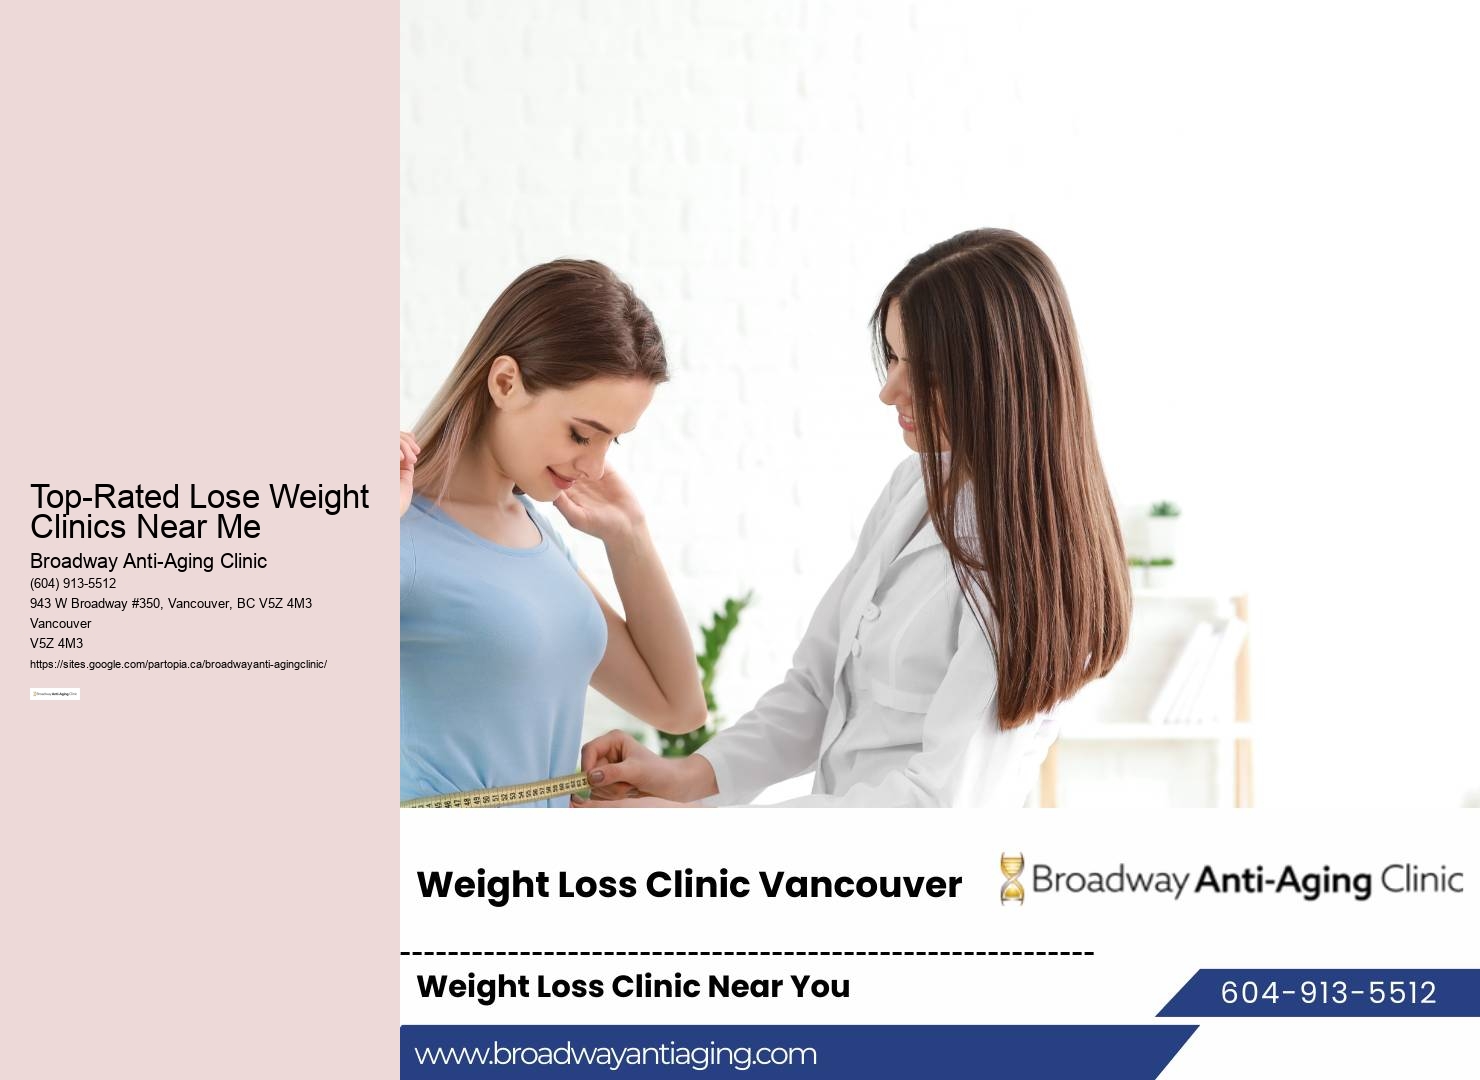 Top-Rated Lose Weight Clinics Near Me